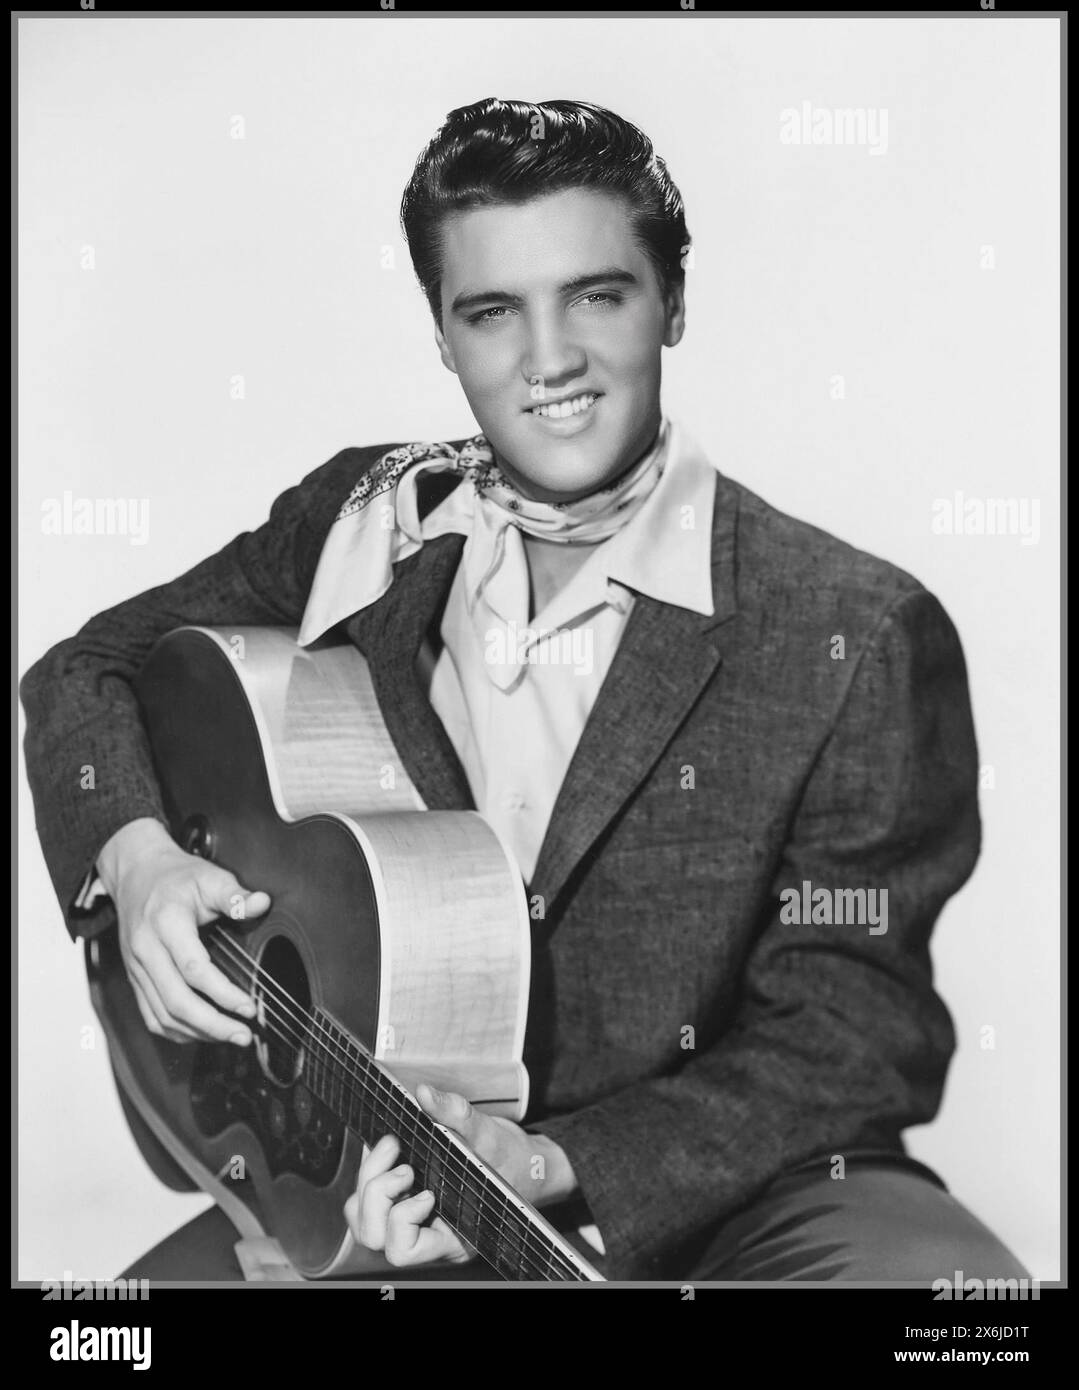 Elvis Presley 1958 posing for a studio promotional portrait on white background with his guitar. ELVIS PRESLEY '50's Vintage 1950's Hollywood film studio press promotional portrait still of Elvis Presley 'The King' Stock Photo